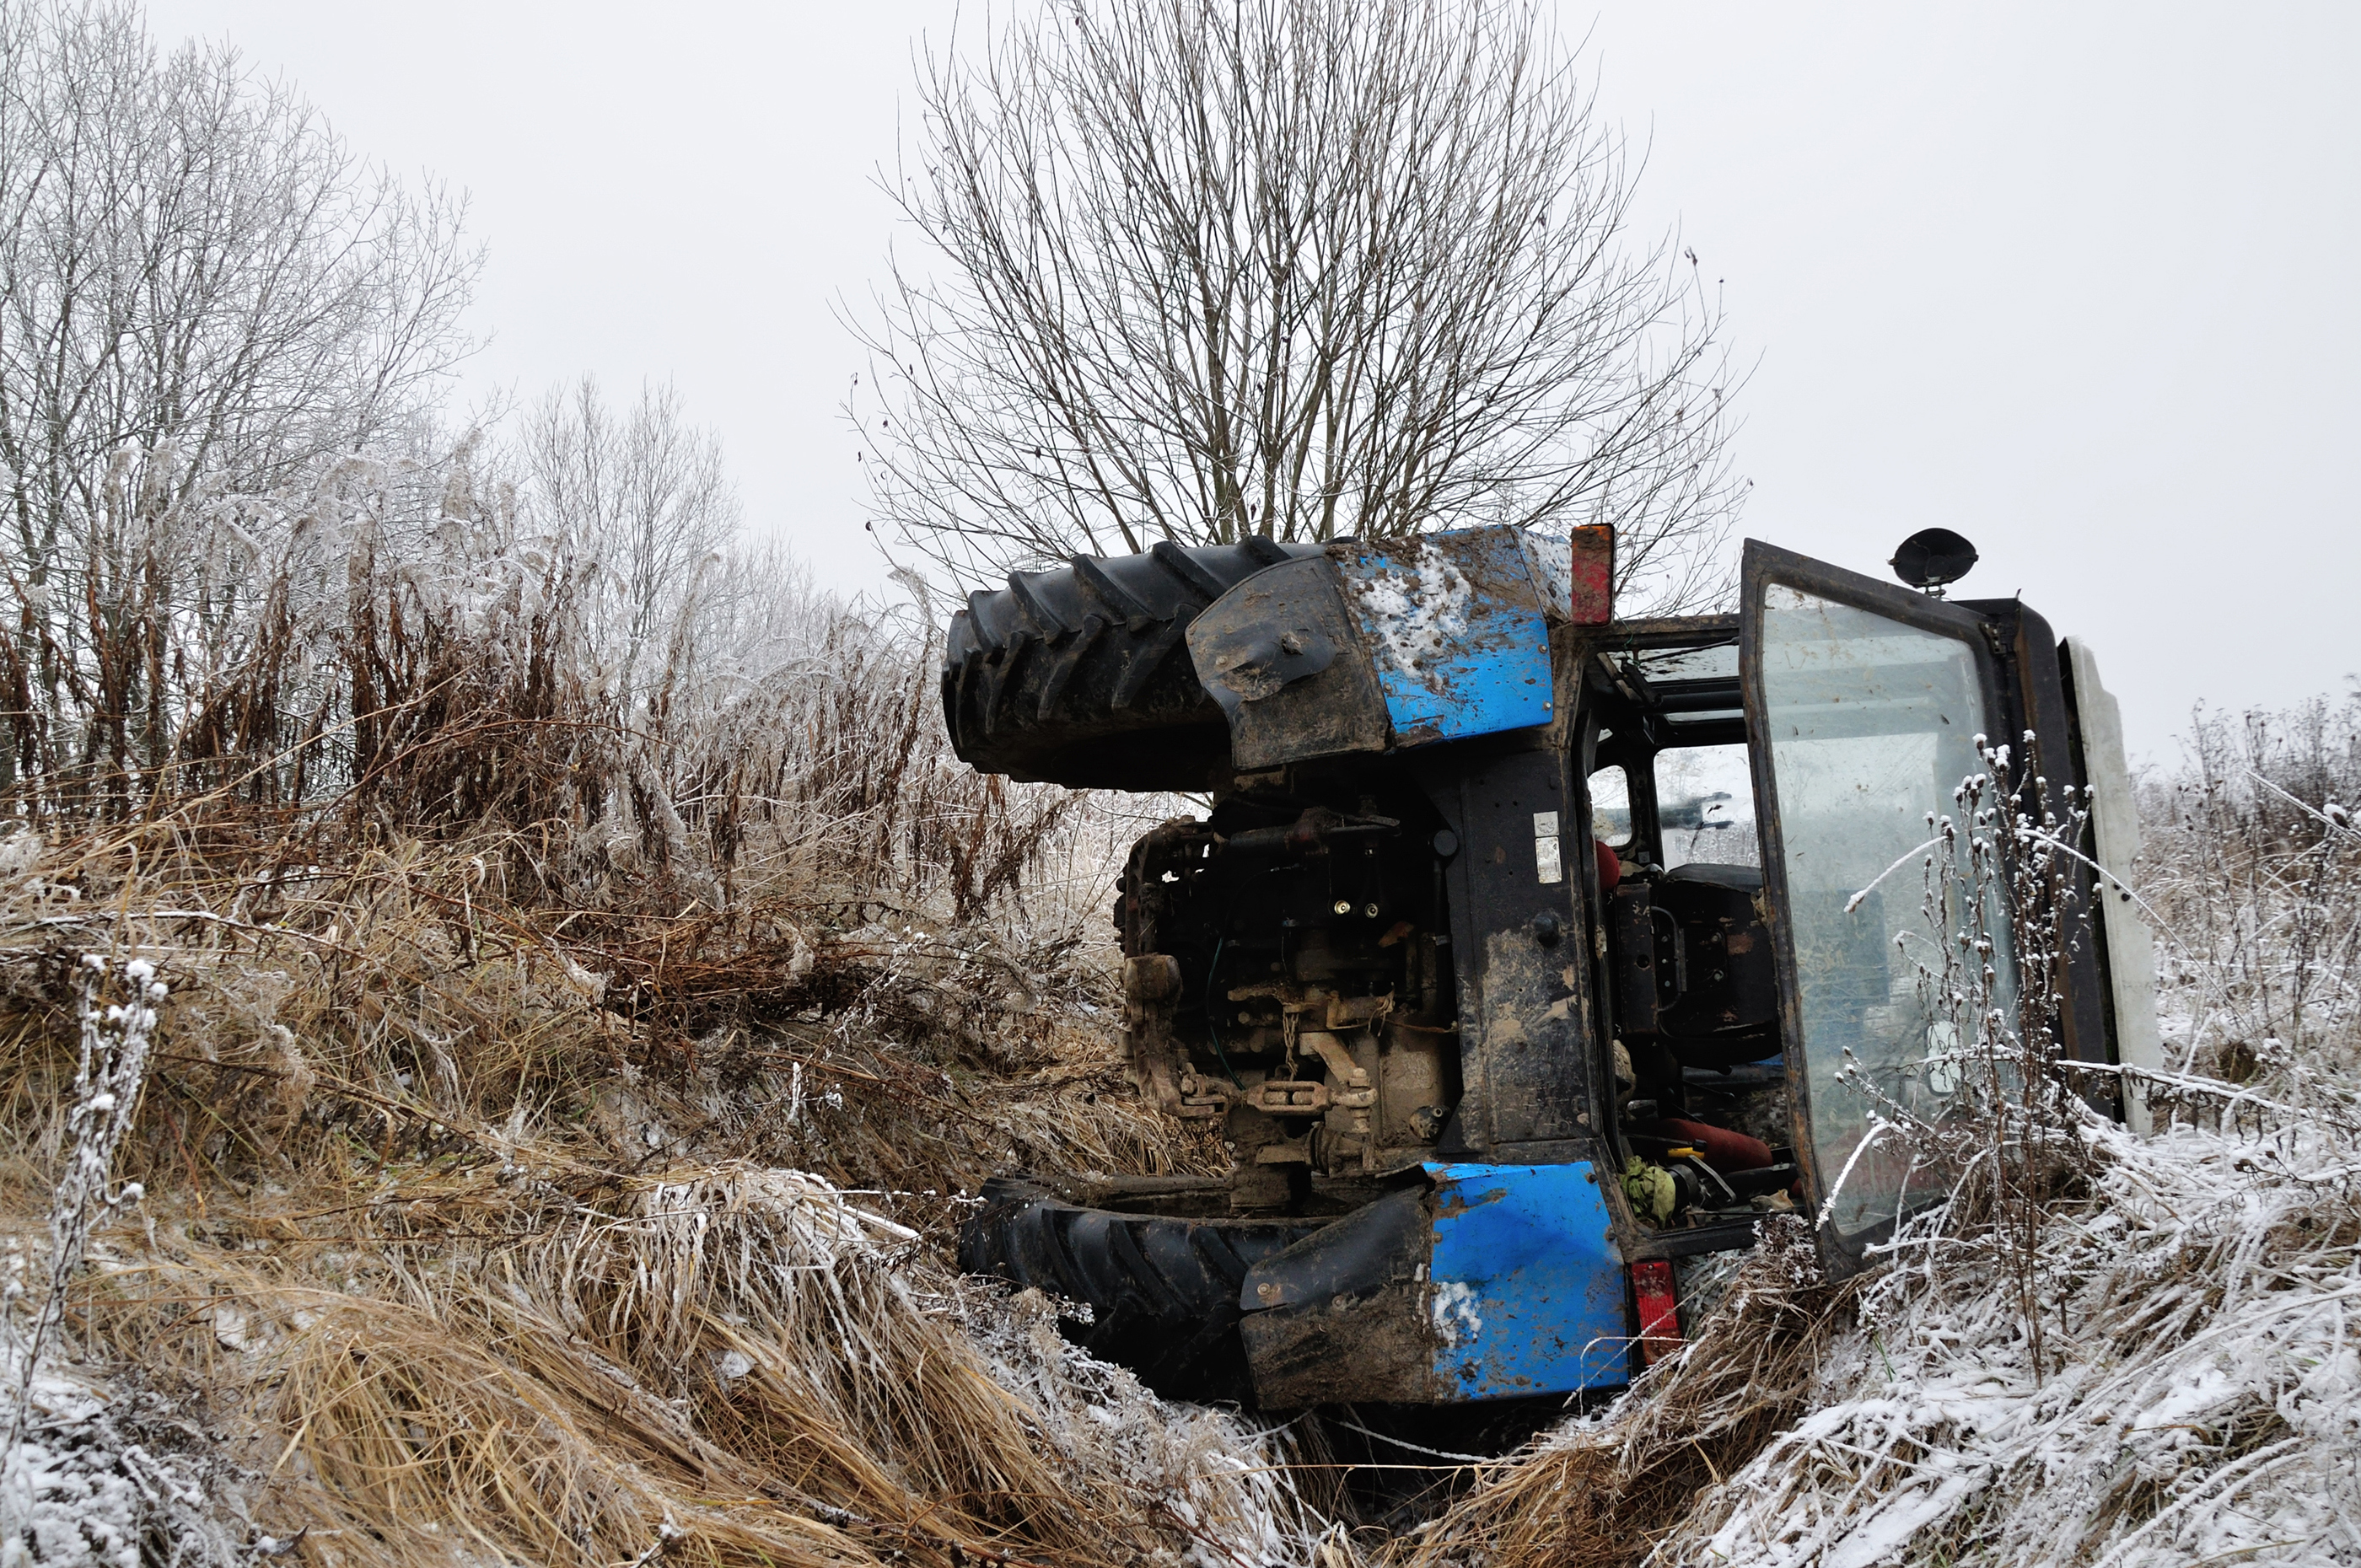 Blue tractor crashed on its side due to a farm accident.